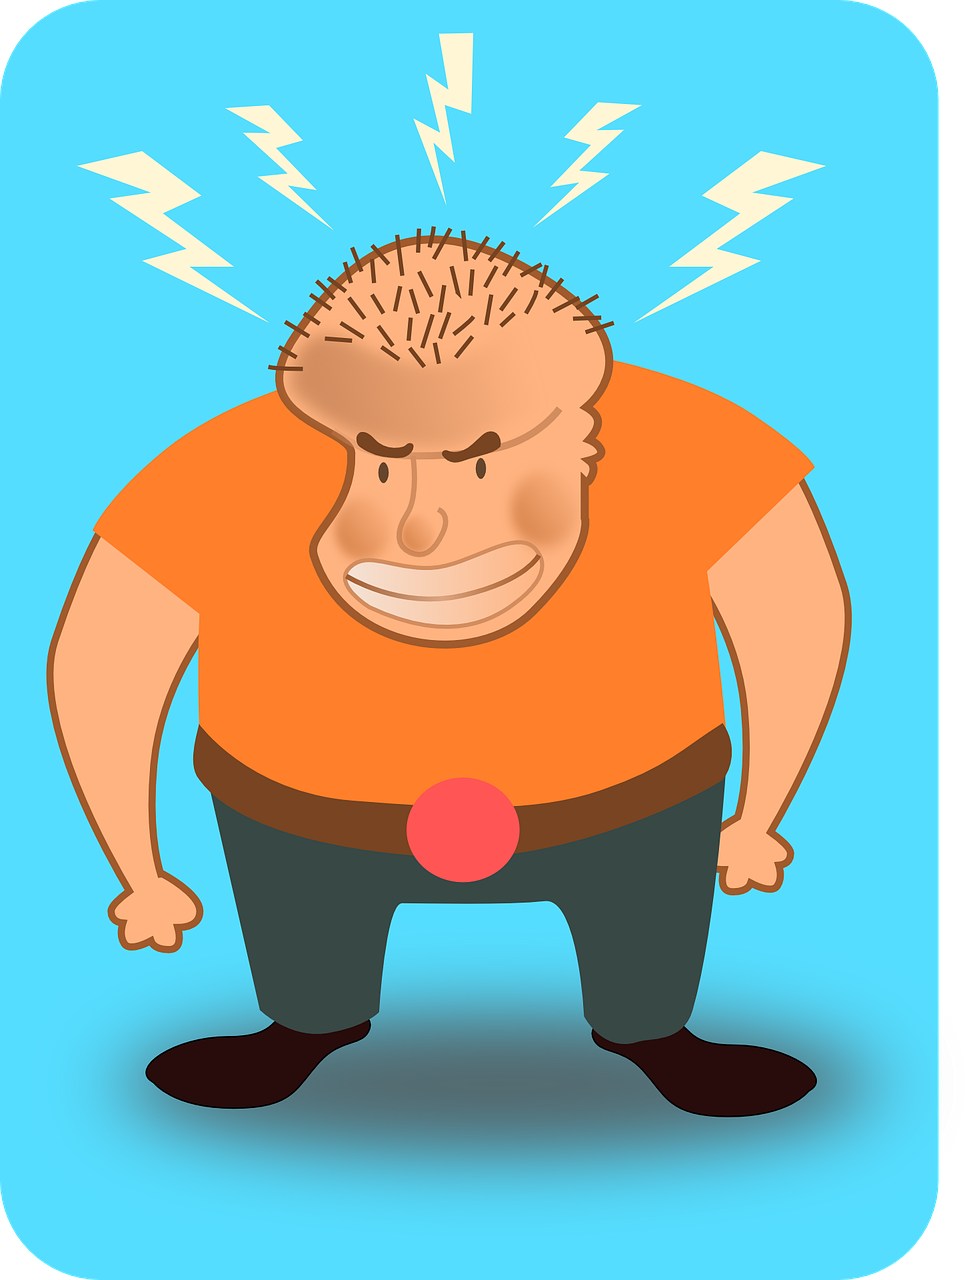 guy,man,angry,thug,disgruntled,free vector graphics,free pictures, free photos, free images, royalty free, free illustrations, public domain